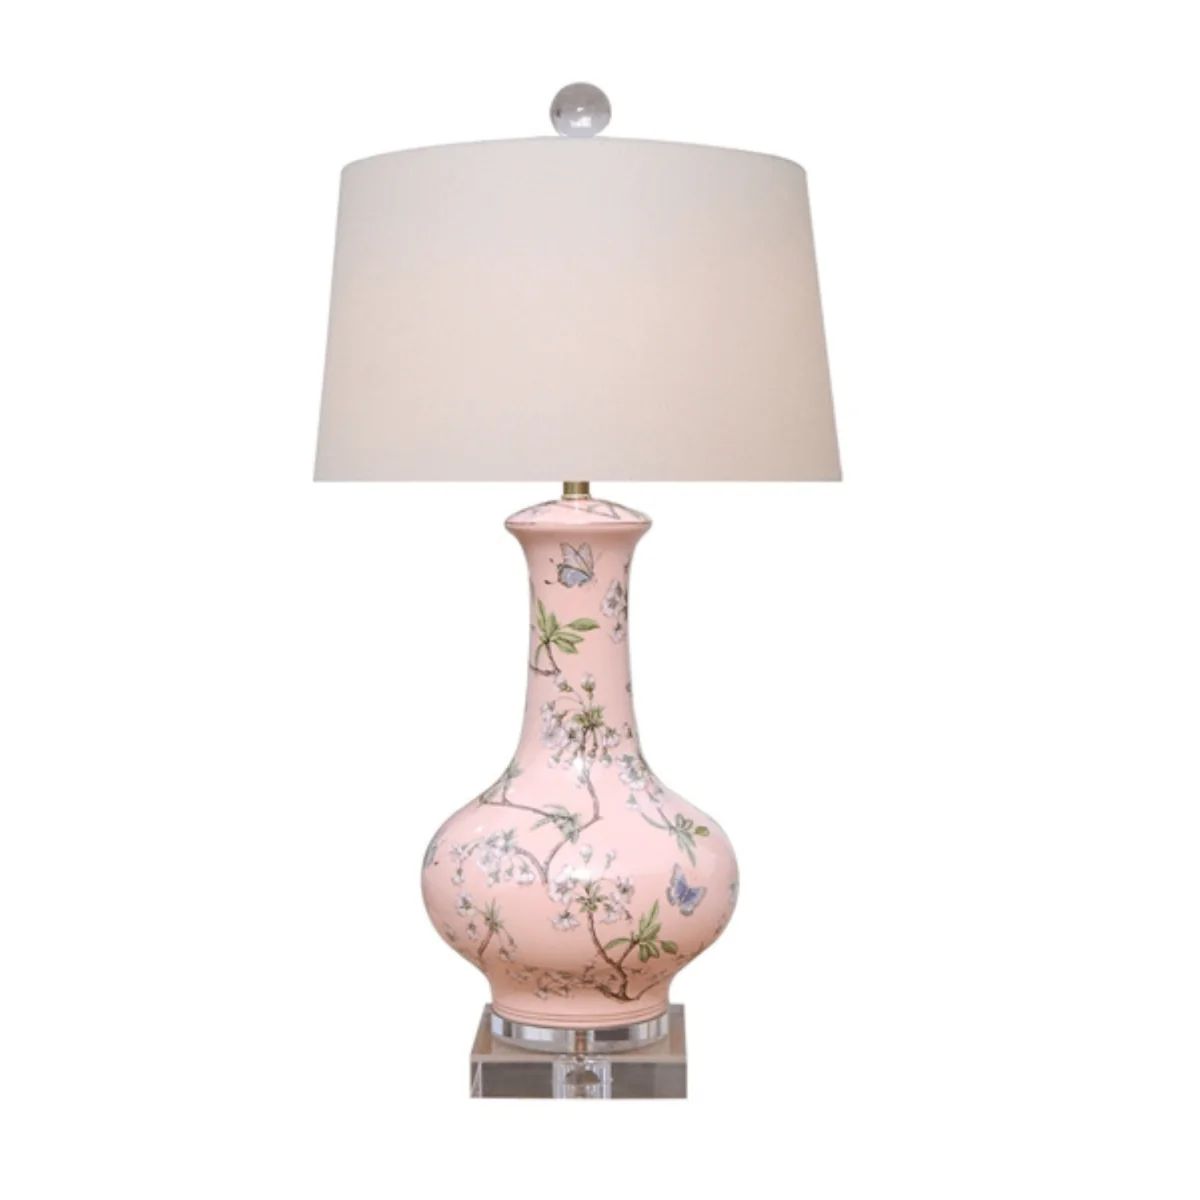 Pink Porcelain Cherry Blossom Vase Lamp With Crystal Base | The Well Appointed House, LLC